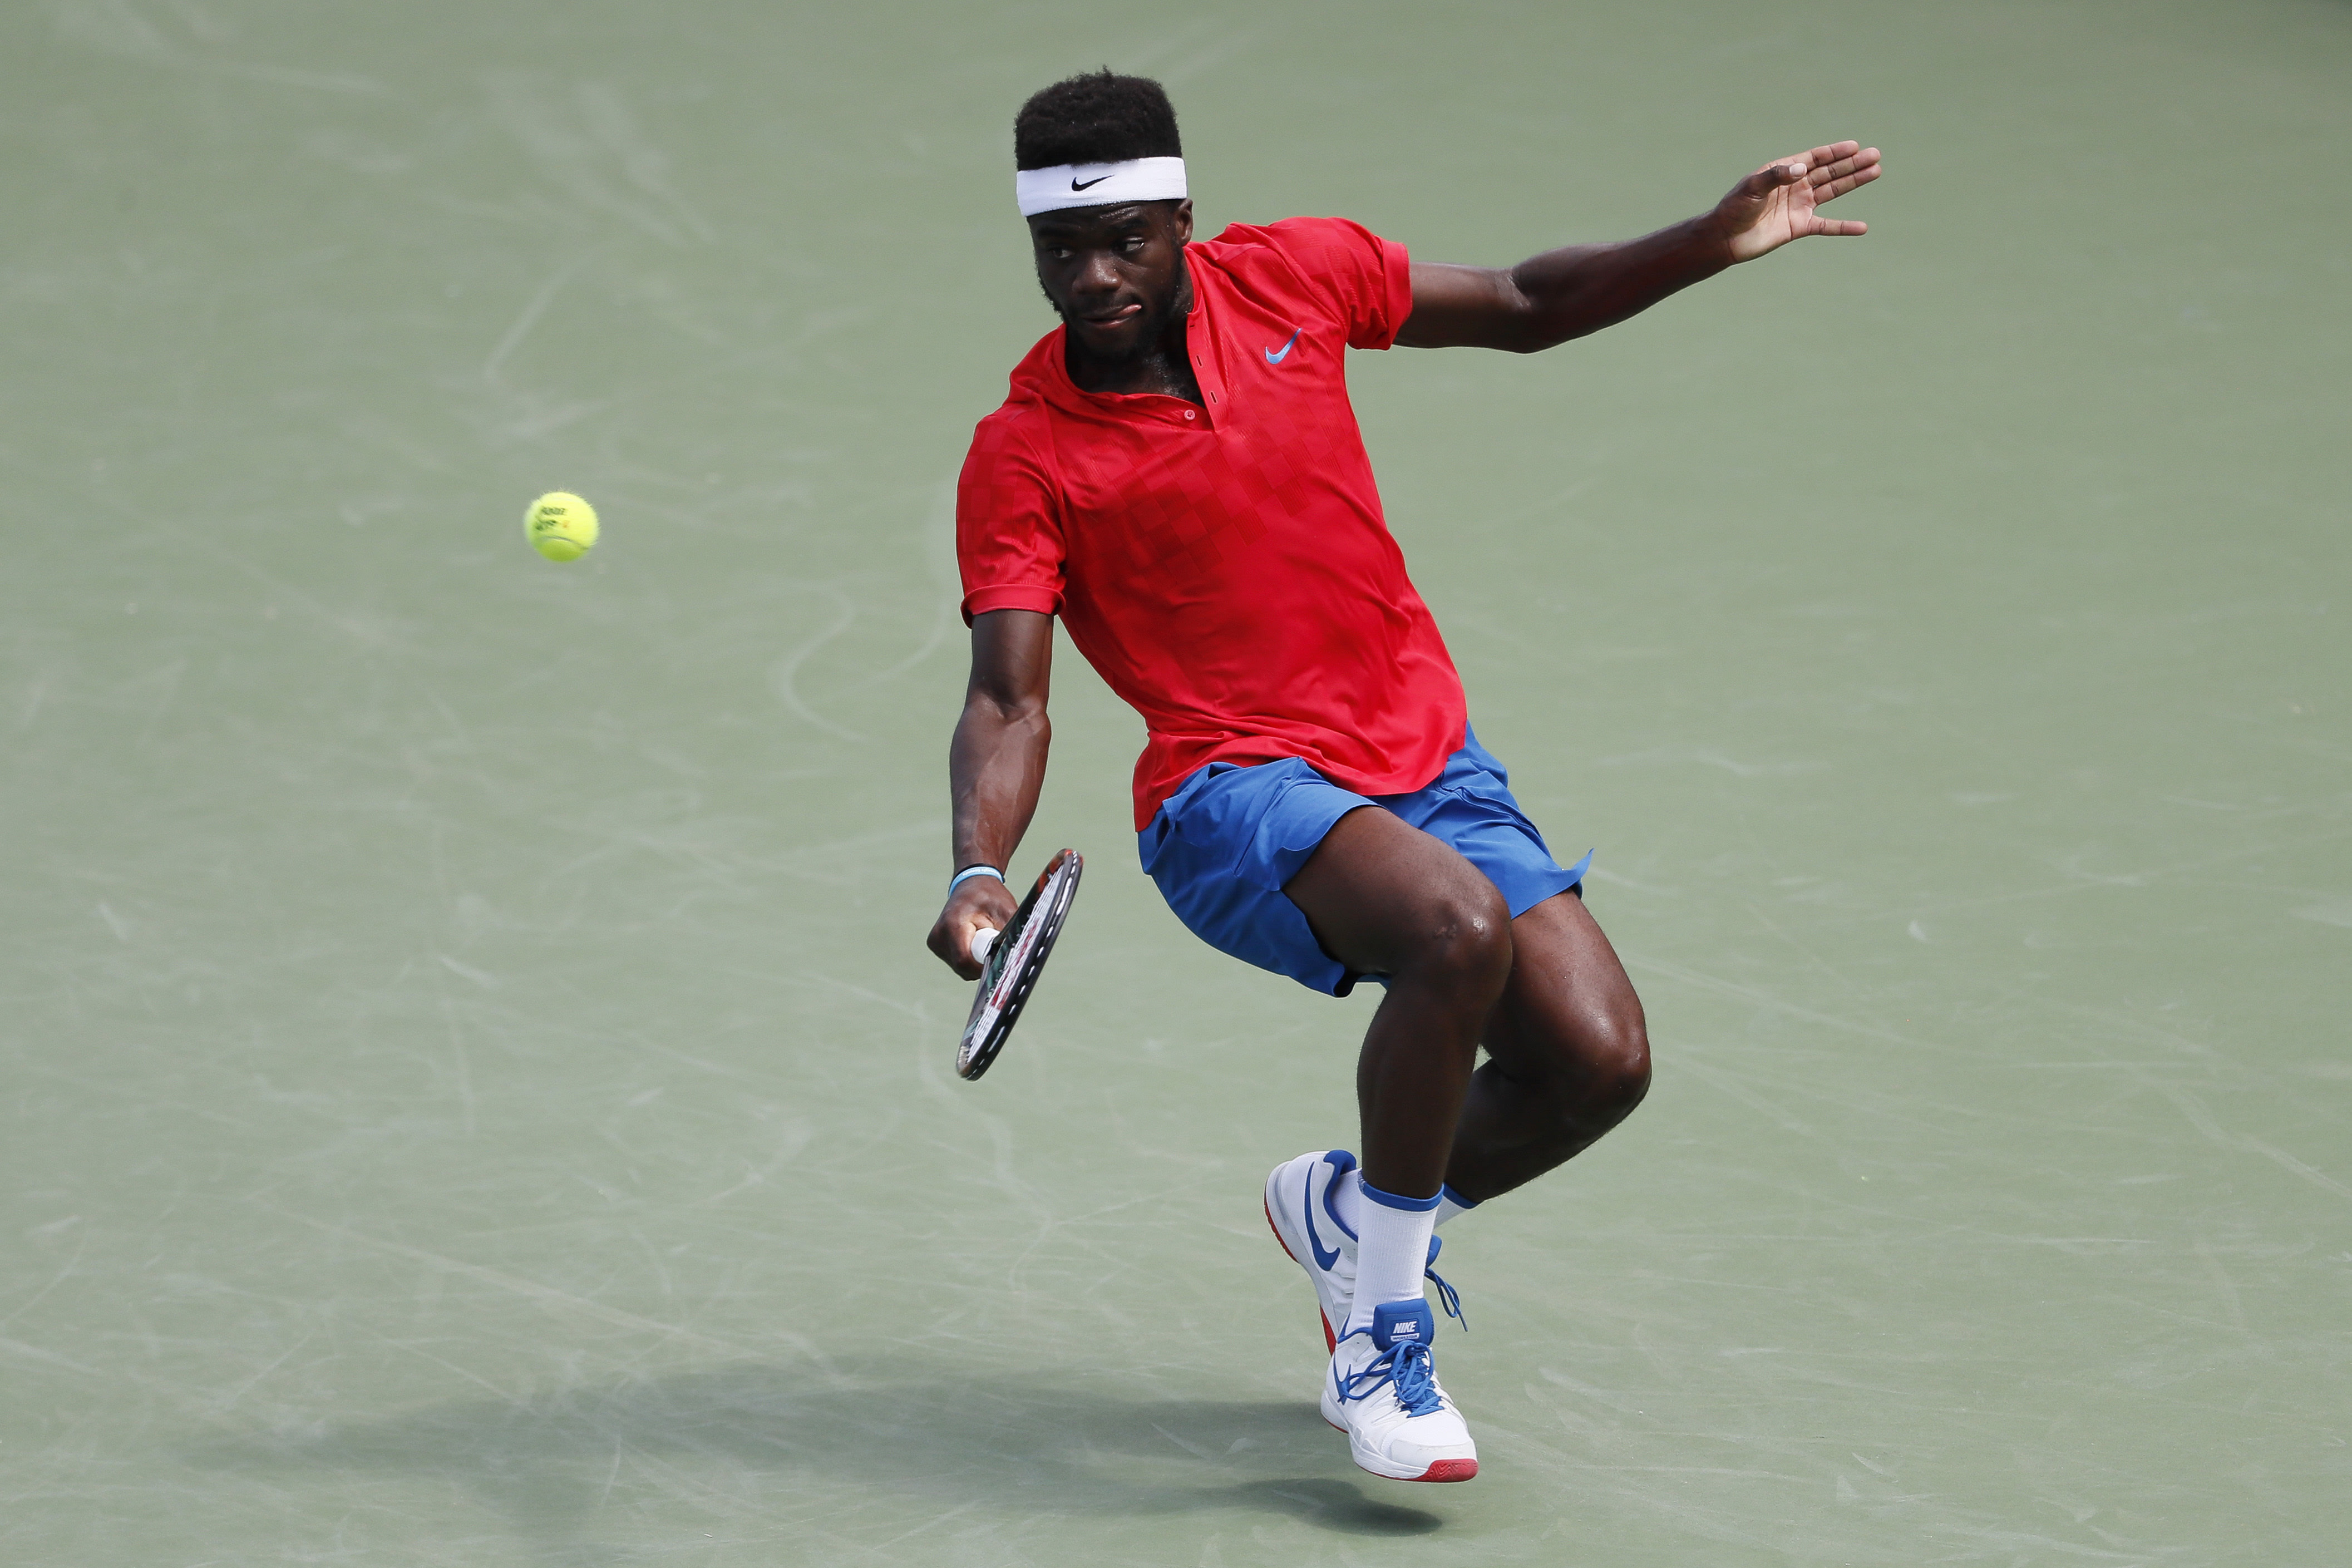 Frances Tiafoe proves he can play at Top 10 level with upset of Zverev